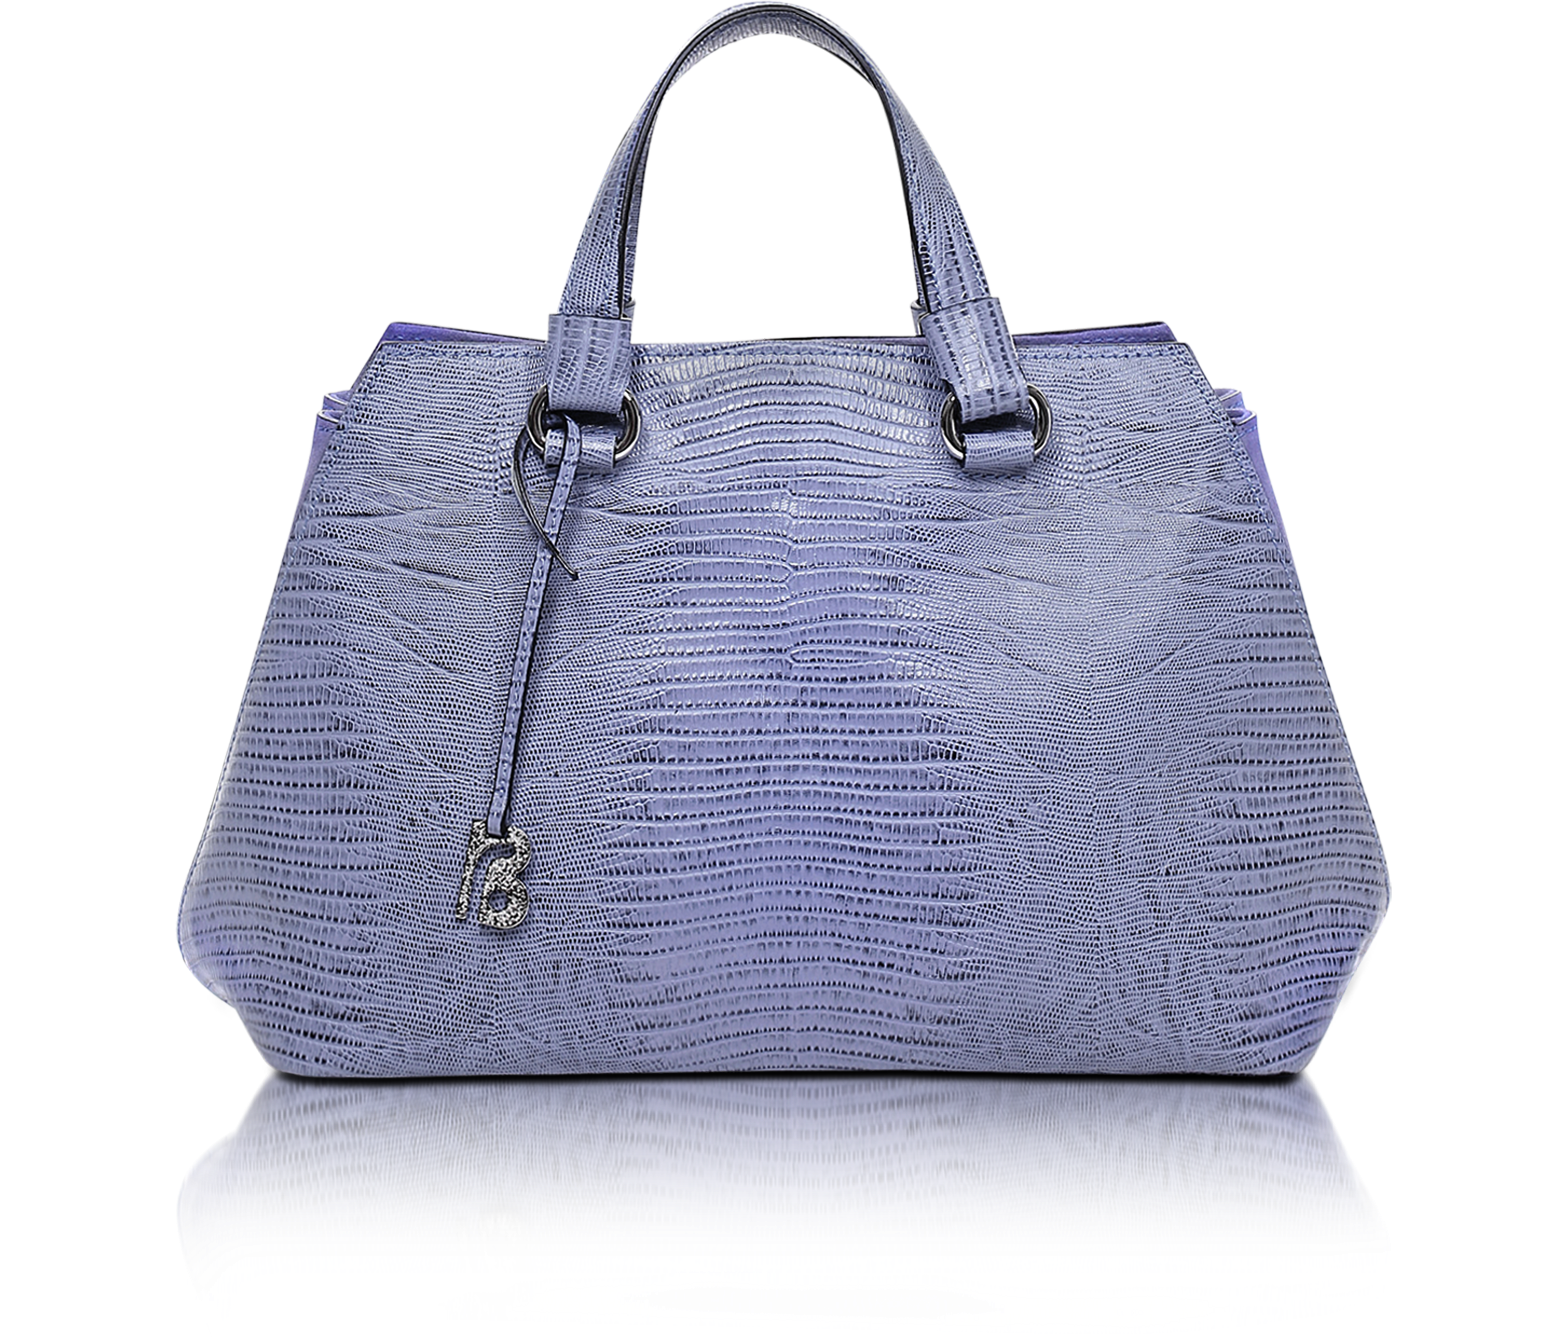 Francesco Biasia Pigalle Violet Lizard Print Leather Tote at FORZIERI